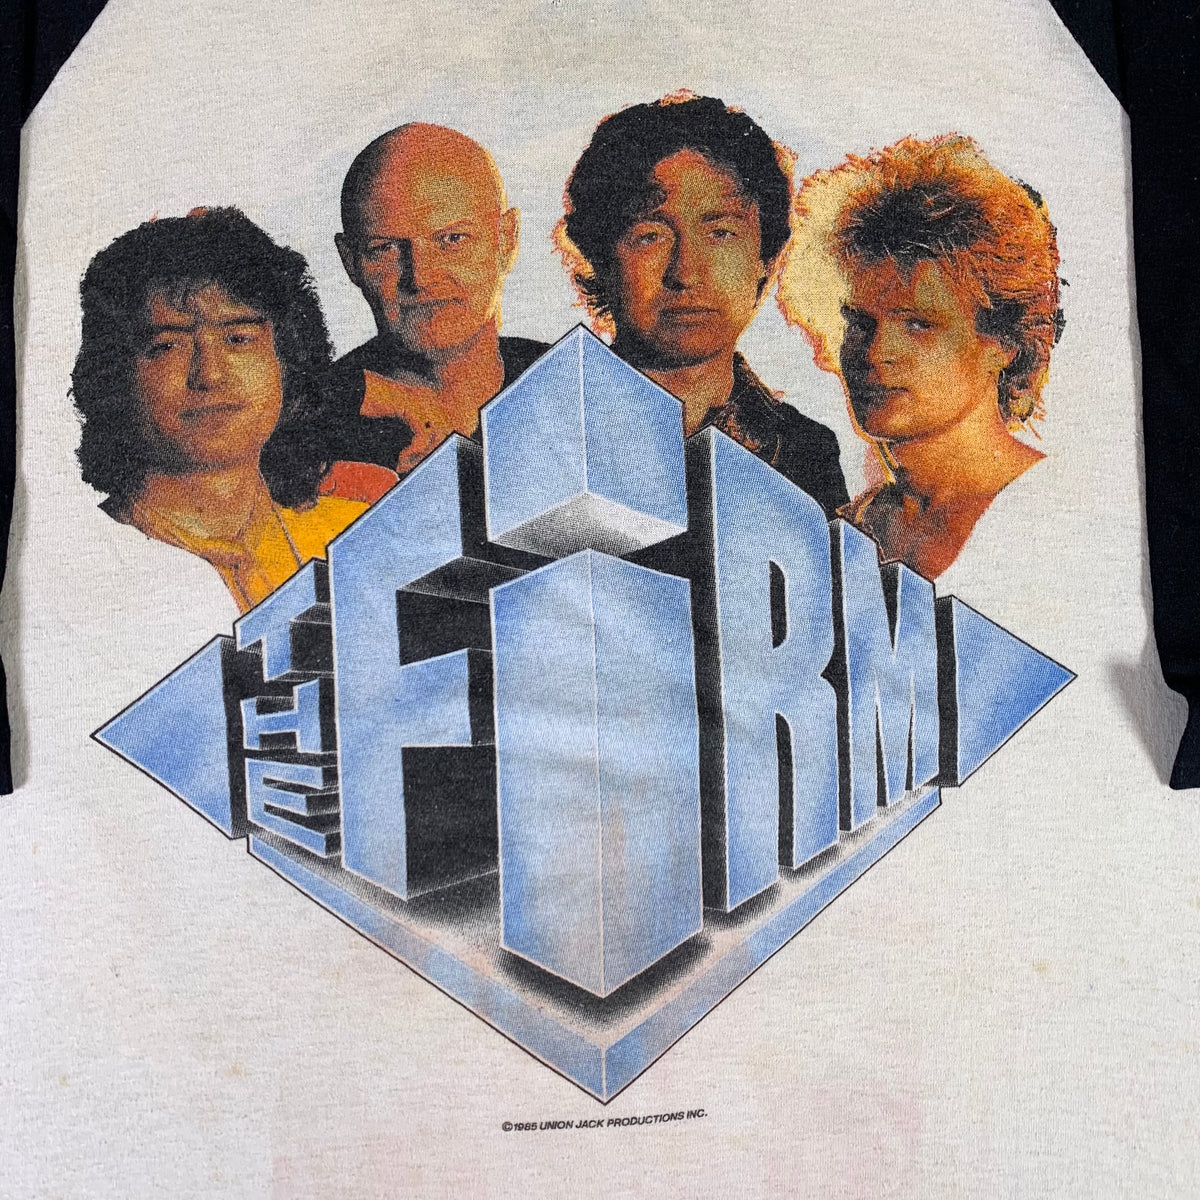 Vintage The Firm &quot;Jimmy Page Paul Rodgers&quot; Raglan Shirt